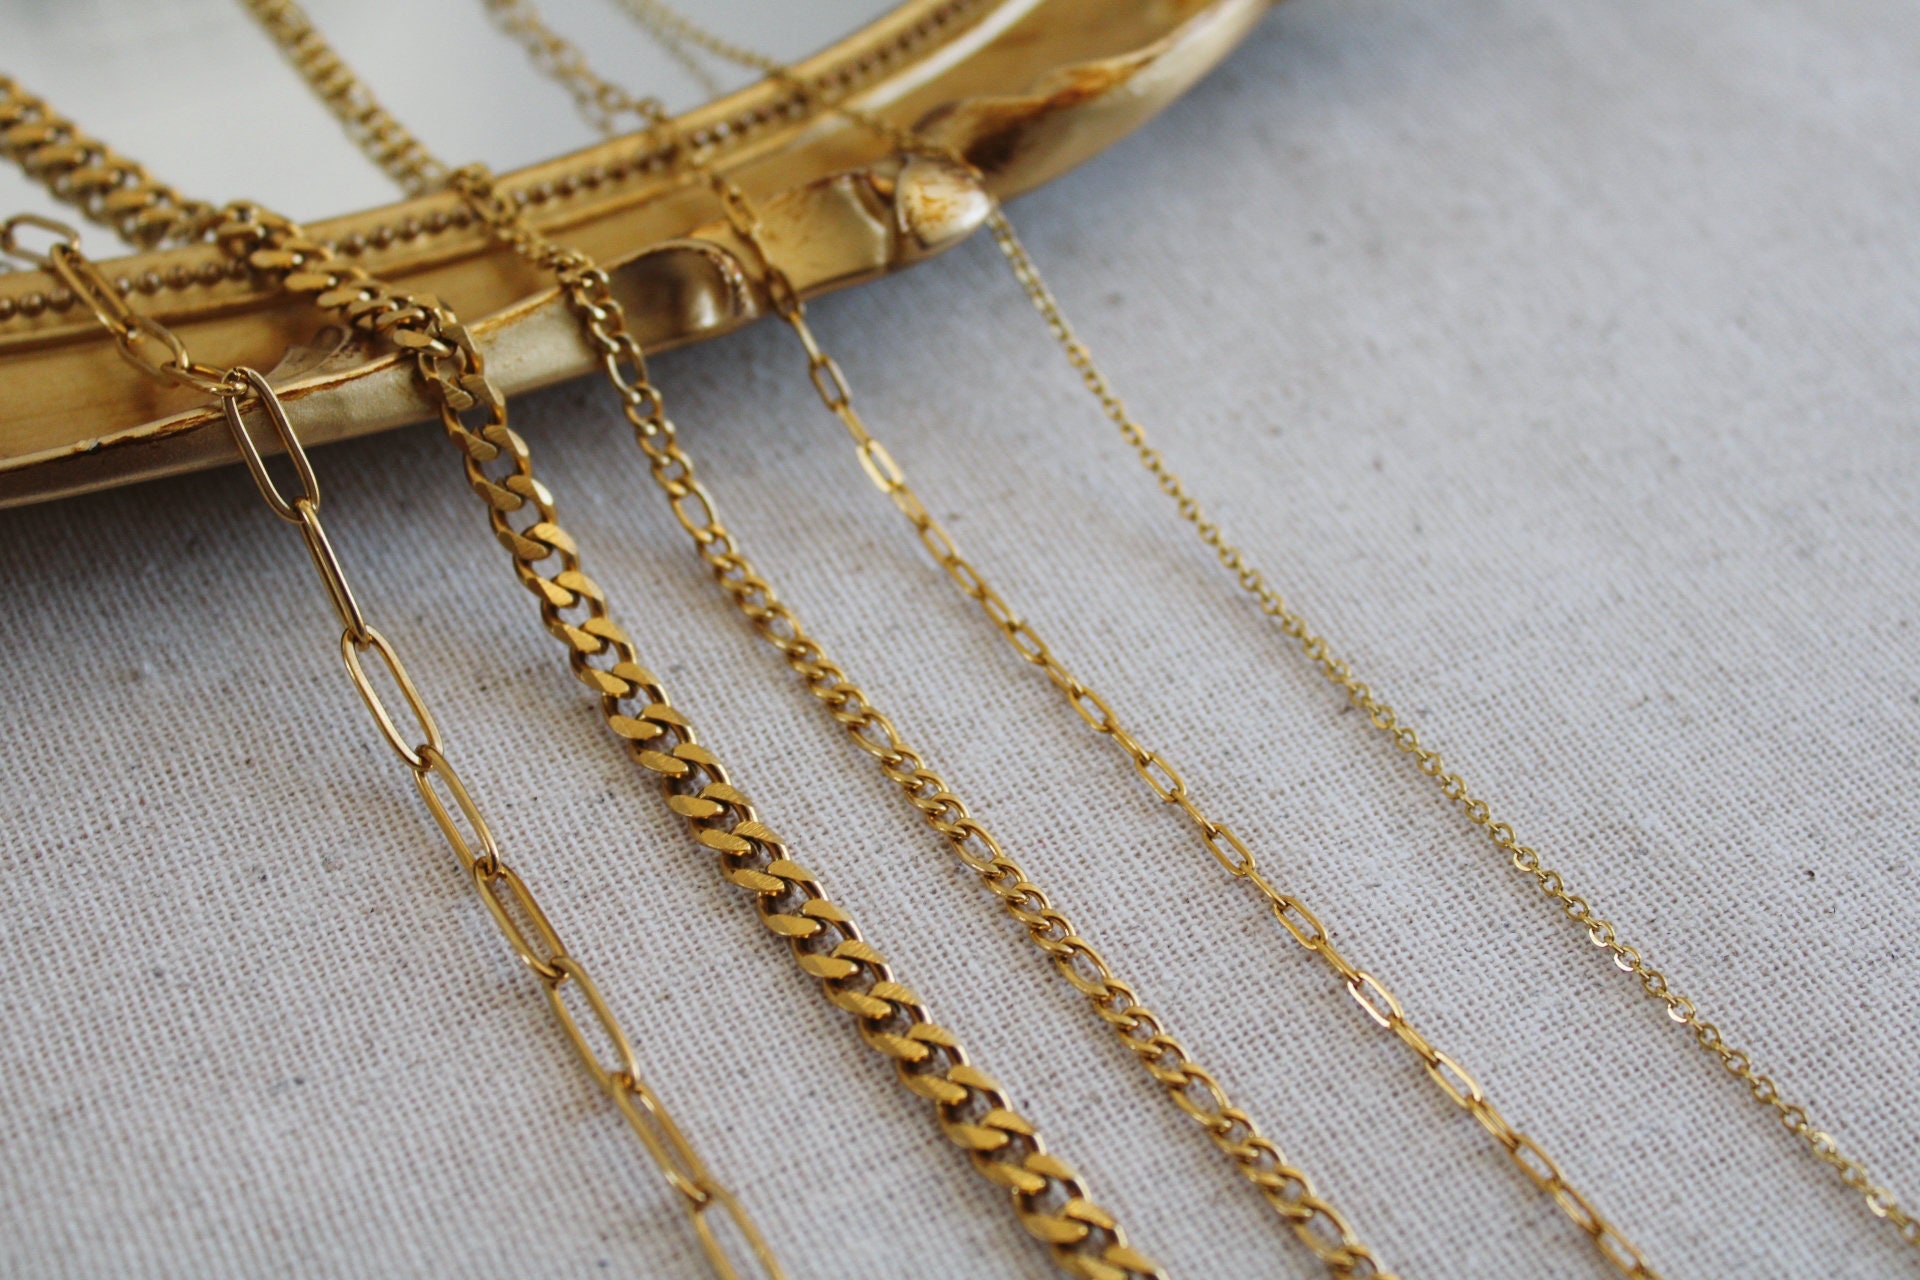 Gold Plated Shell Shaped Chain, Necklace Chain, Bulk Chain